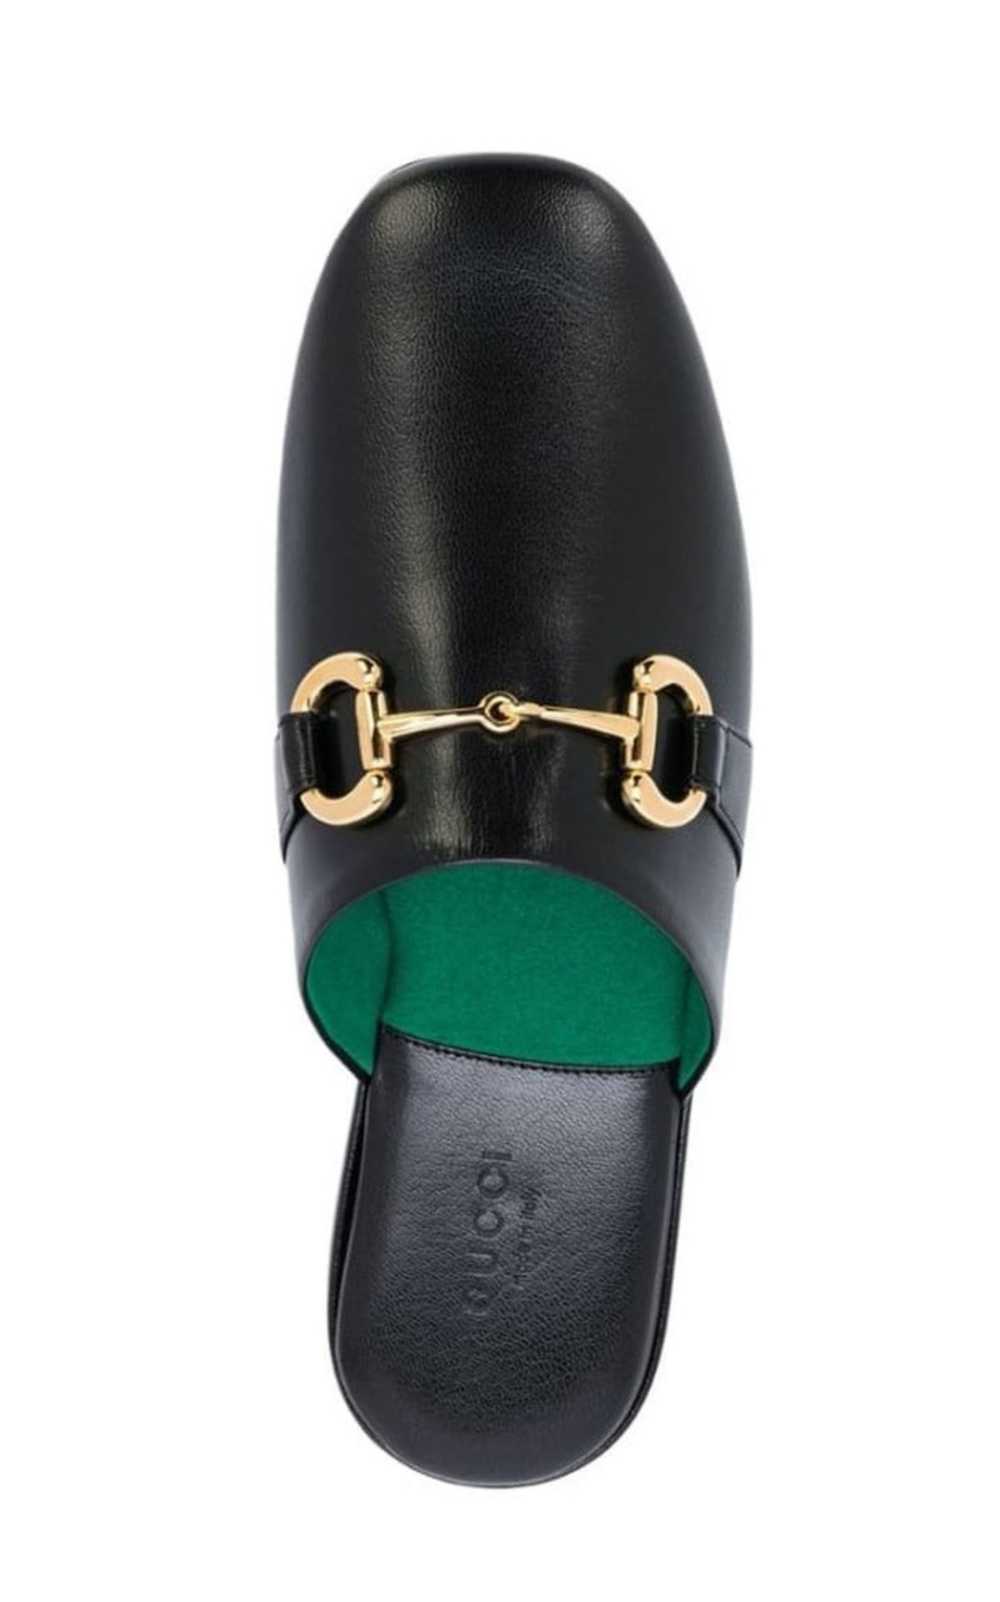 GUCCI Pericle Horsebit Leather Slippers - image 4